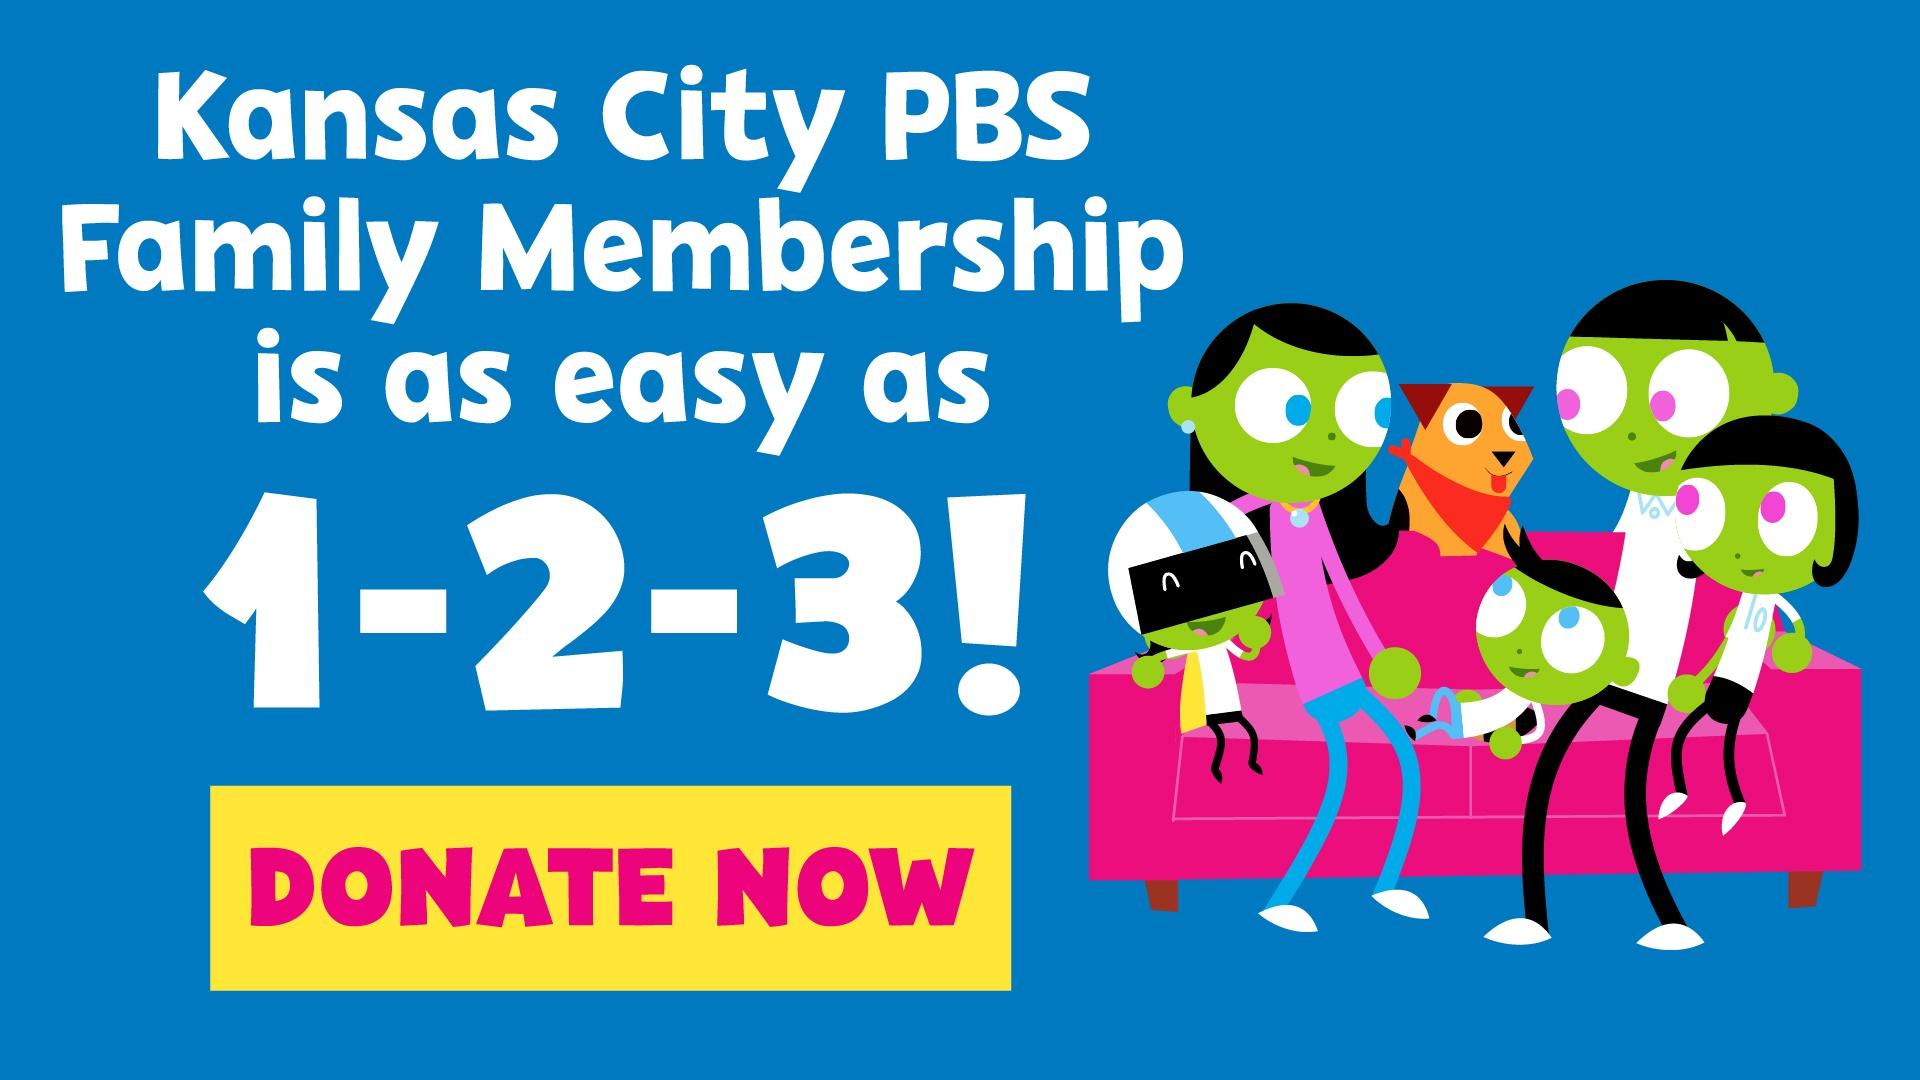 Kansas City PBS Family Membership is as easy as 1-2-3! Donate Now, PBS Kids family and dog on sofa